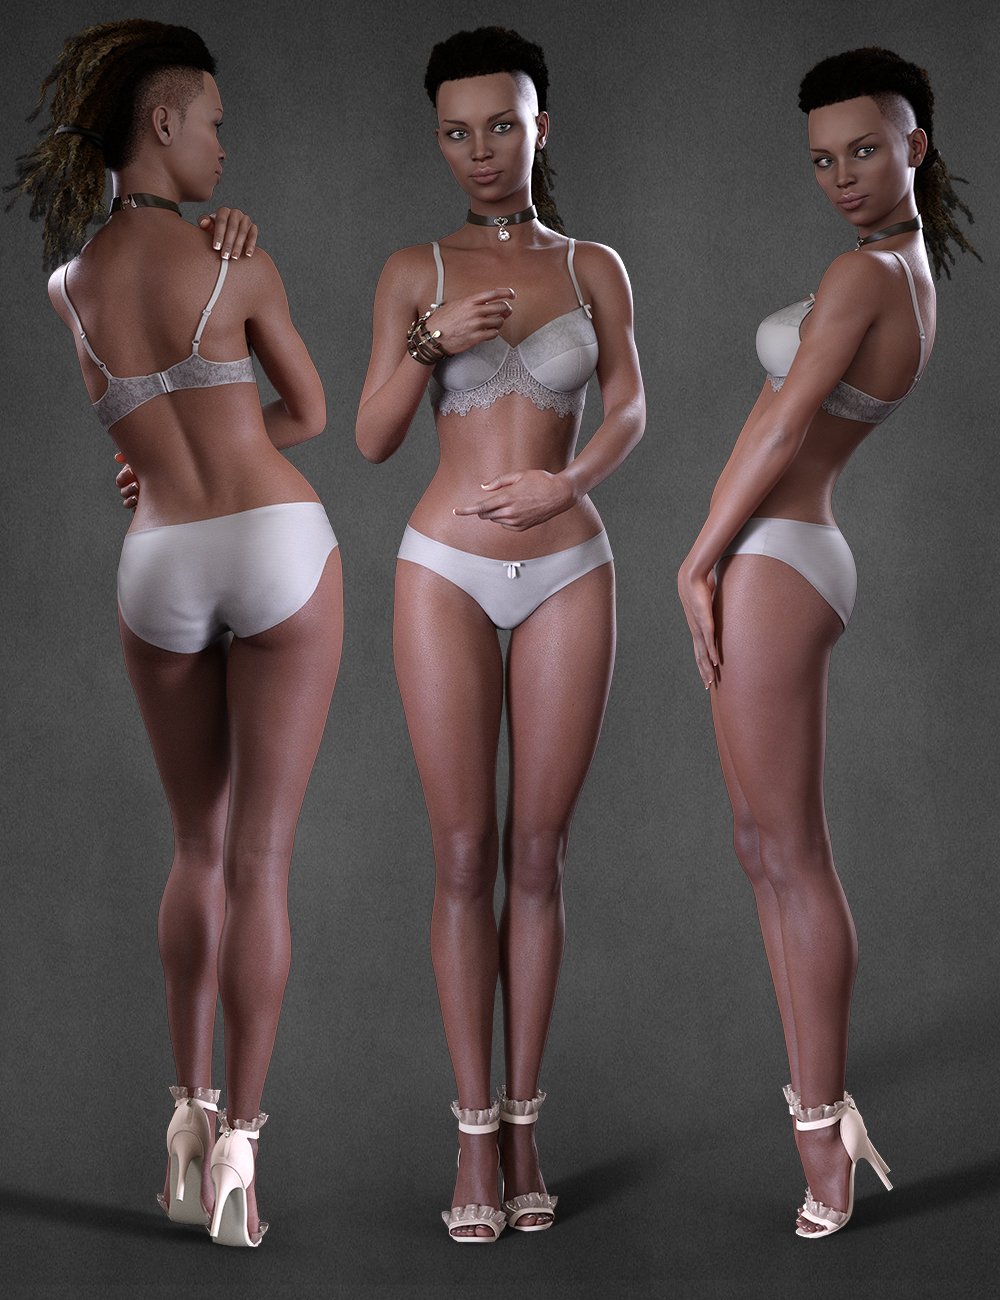 Benni For Darcy 8 by: hotlilme74, 3D Models by Daz 3D